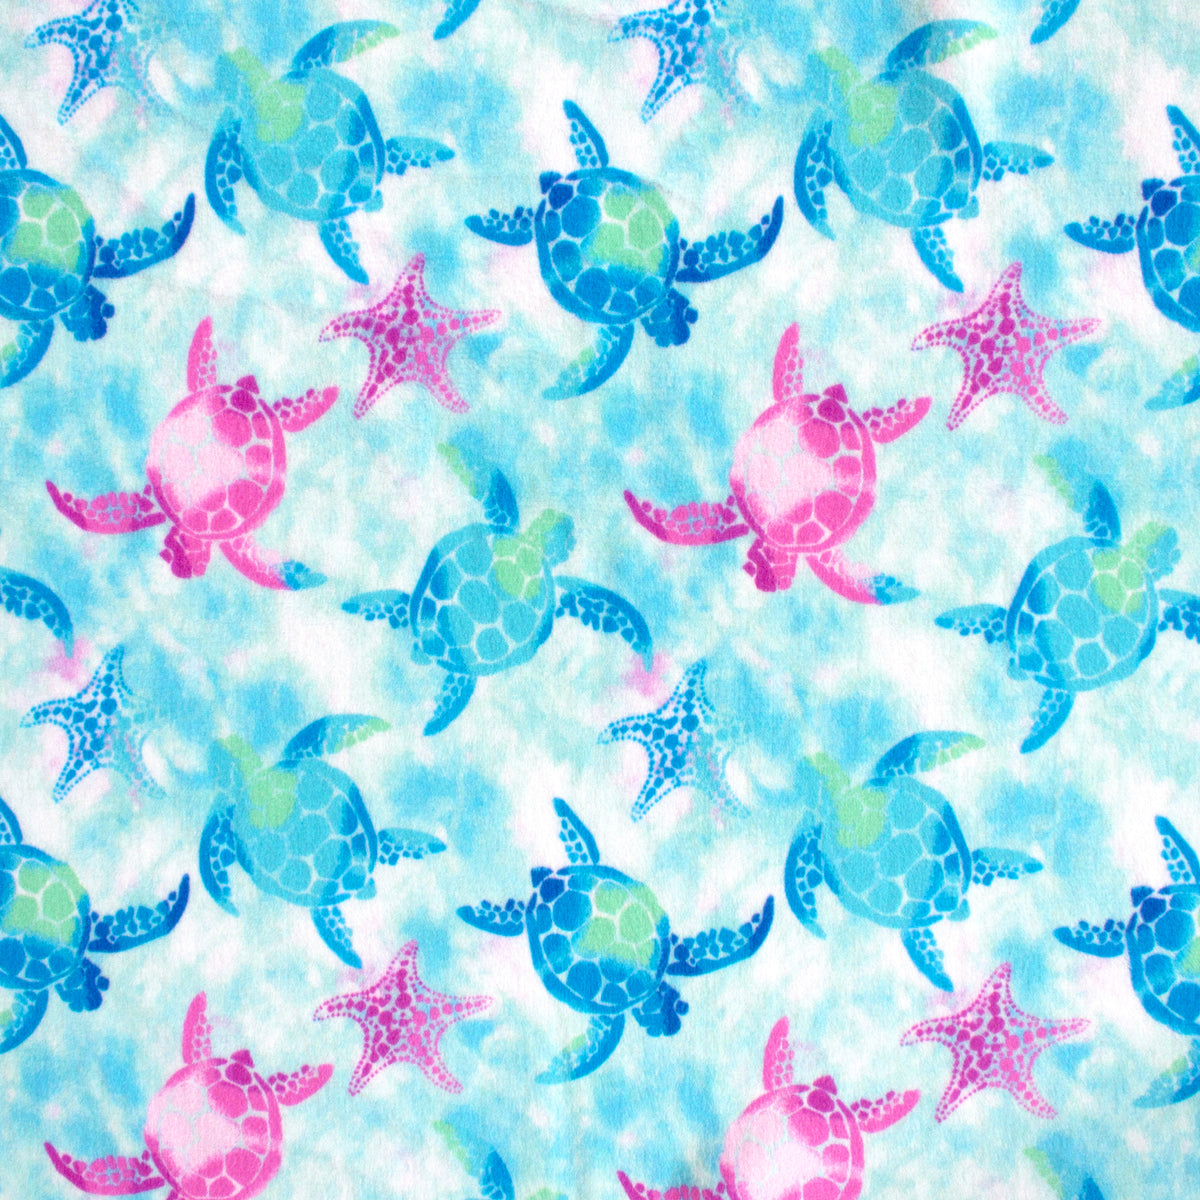 Small Tie-Dye Sea Stars and Turtles